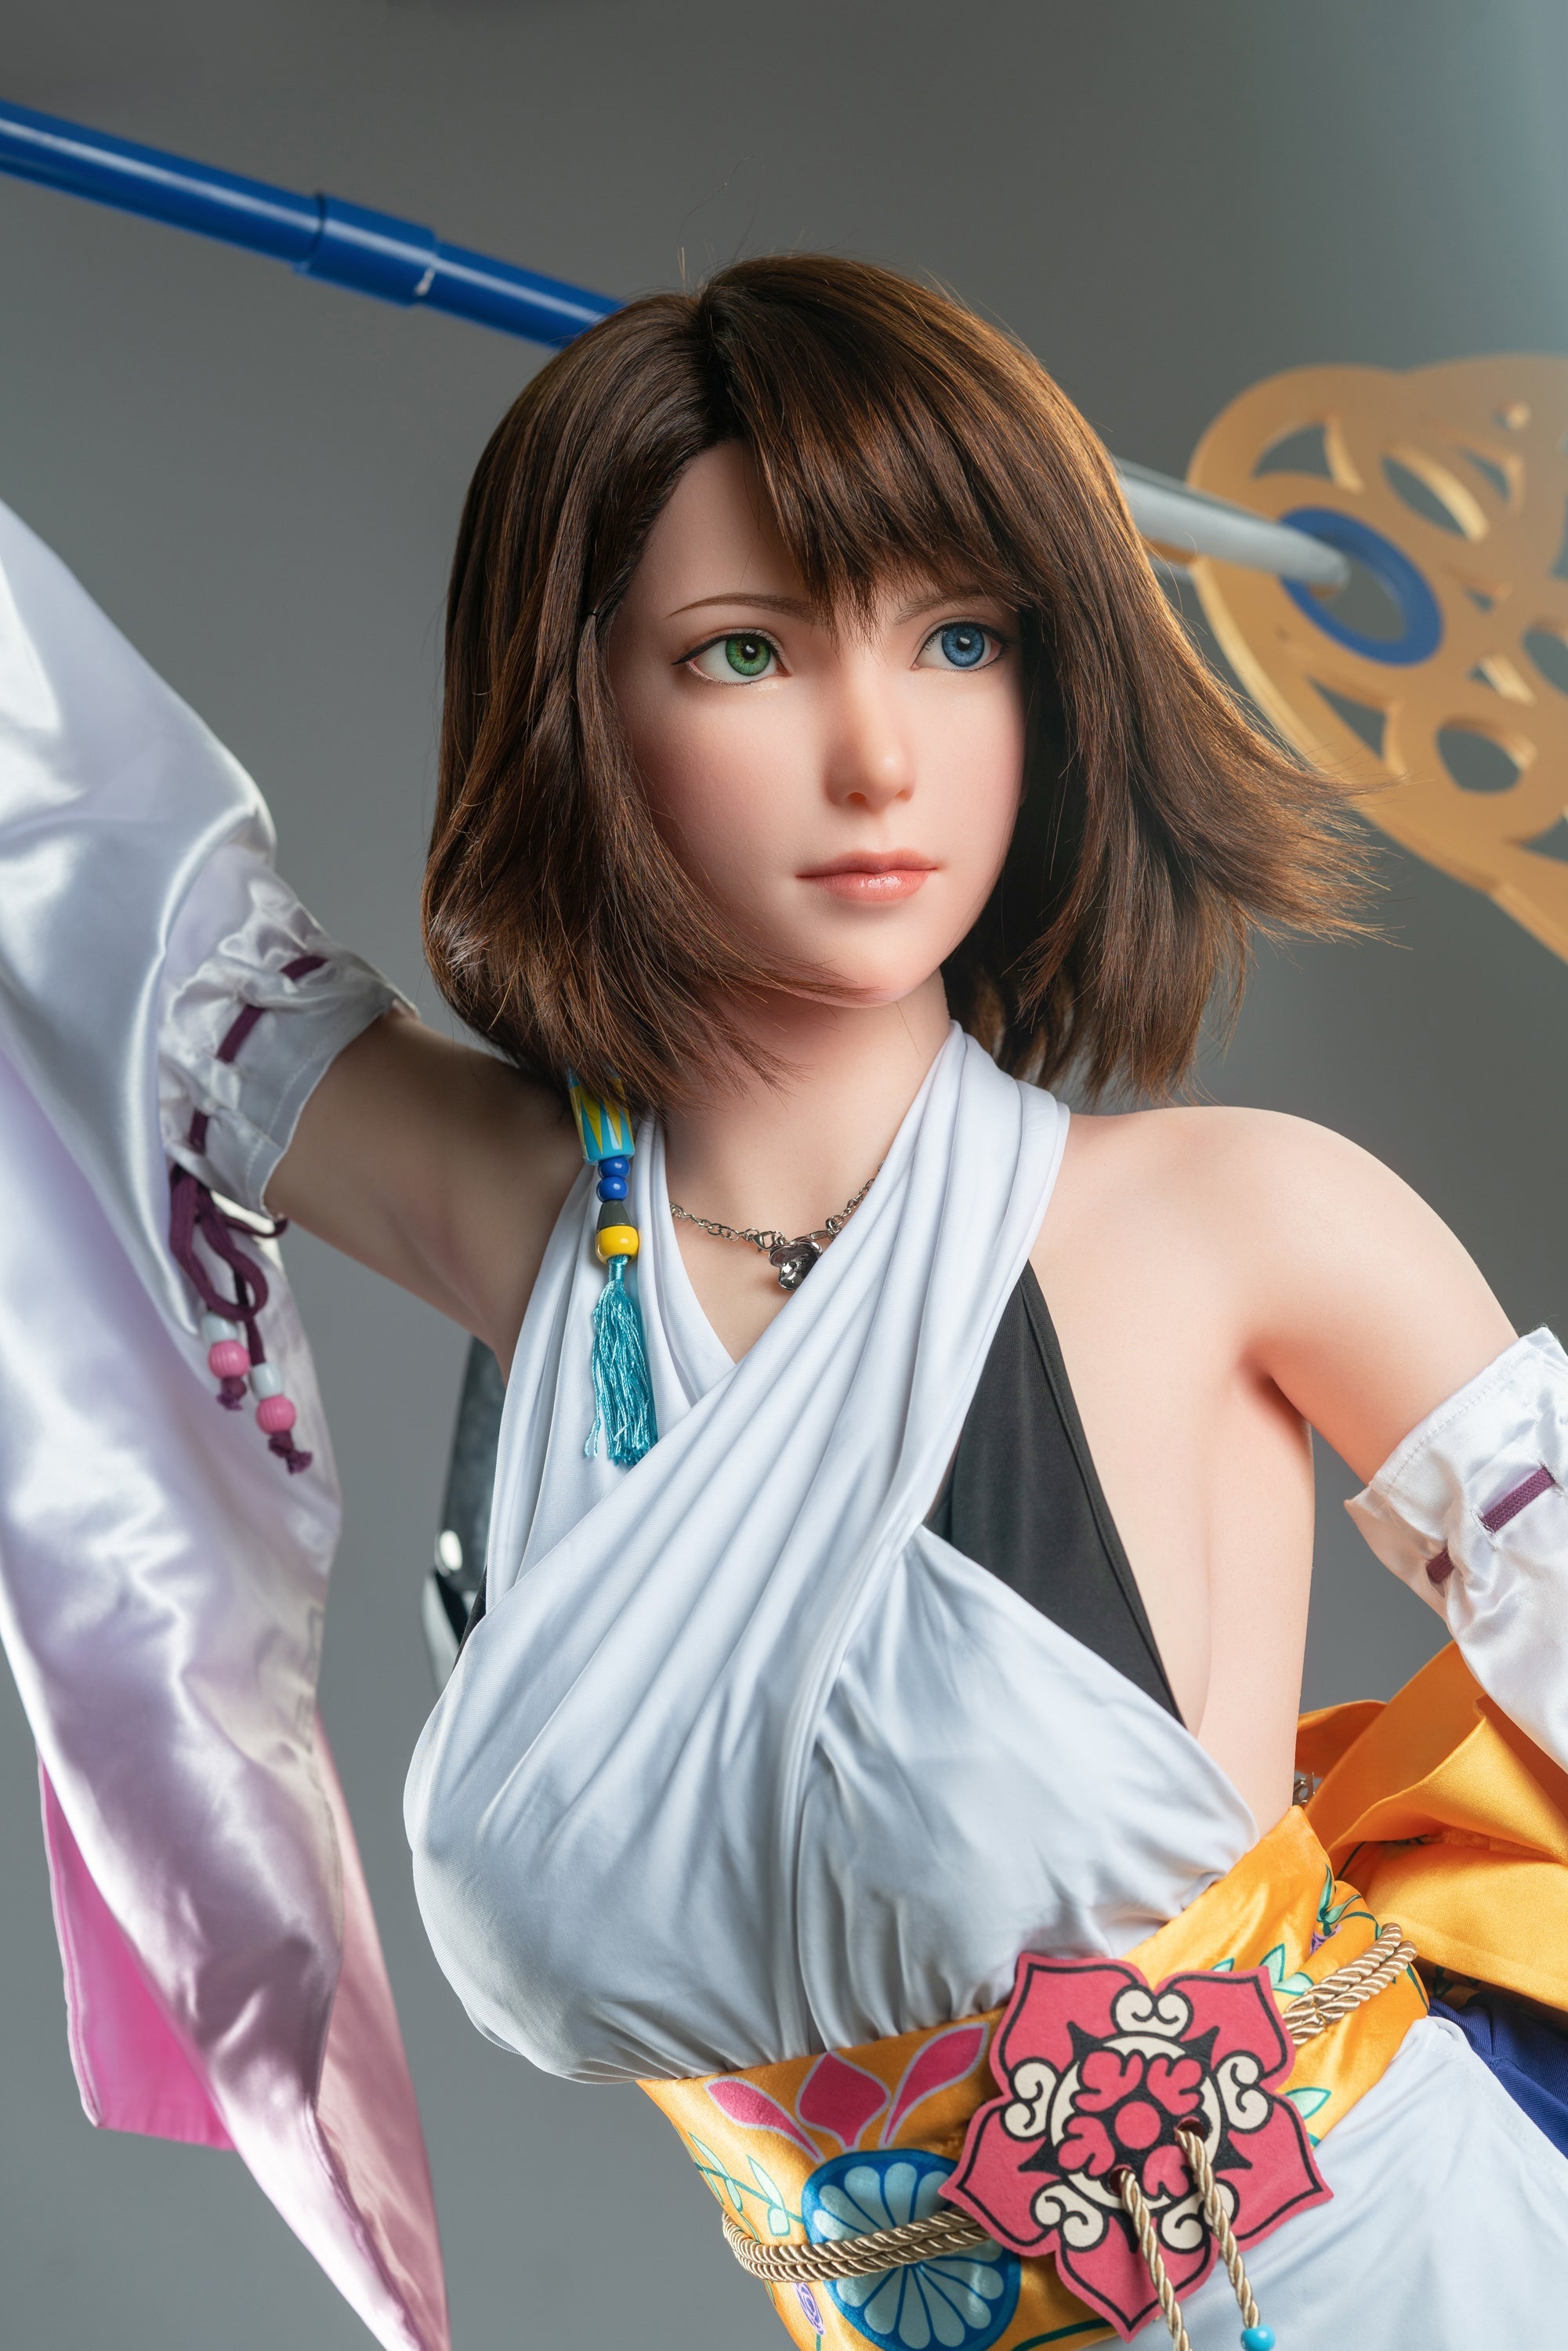 Yuna's Costume | Buy Sex Dolls at DOLLS ACTUALLY